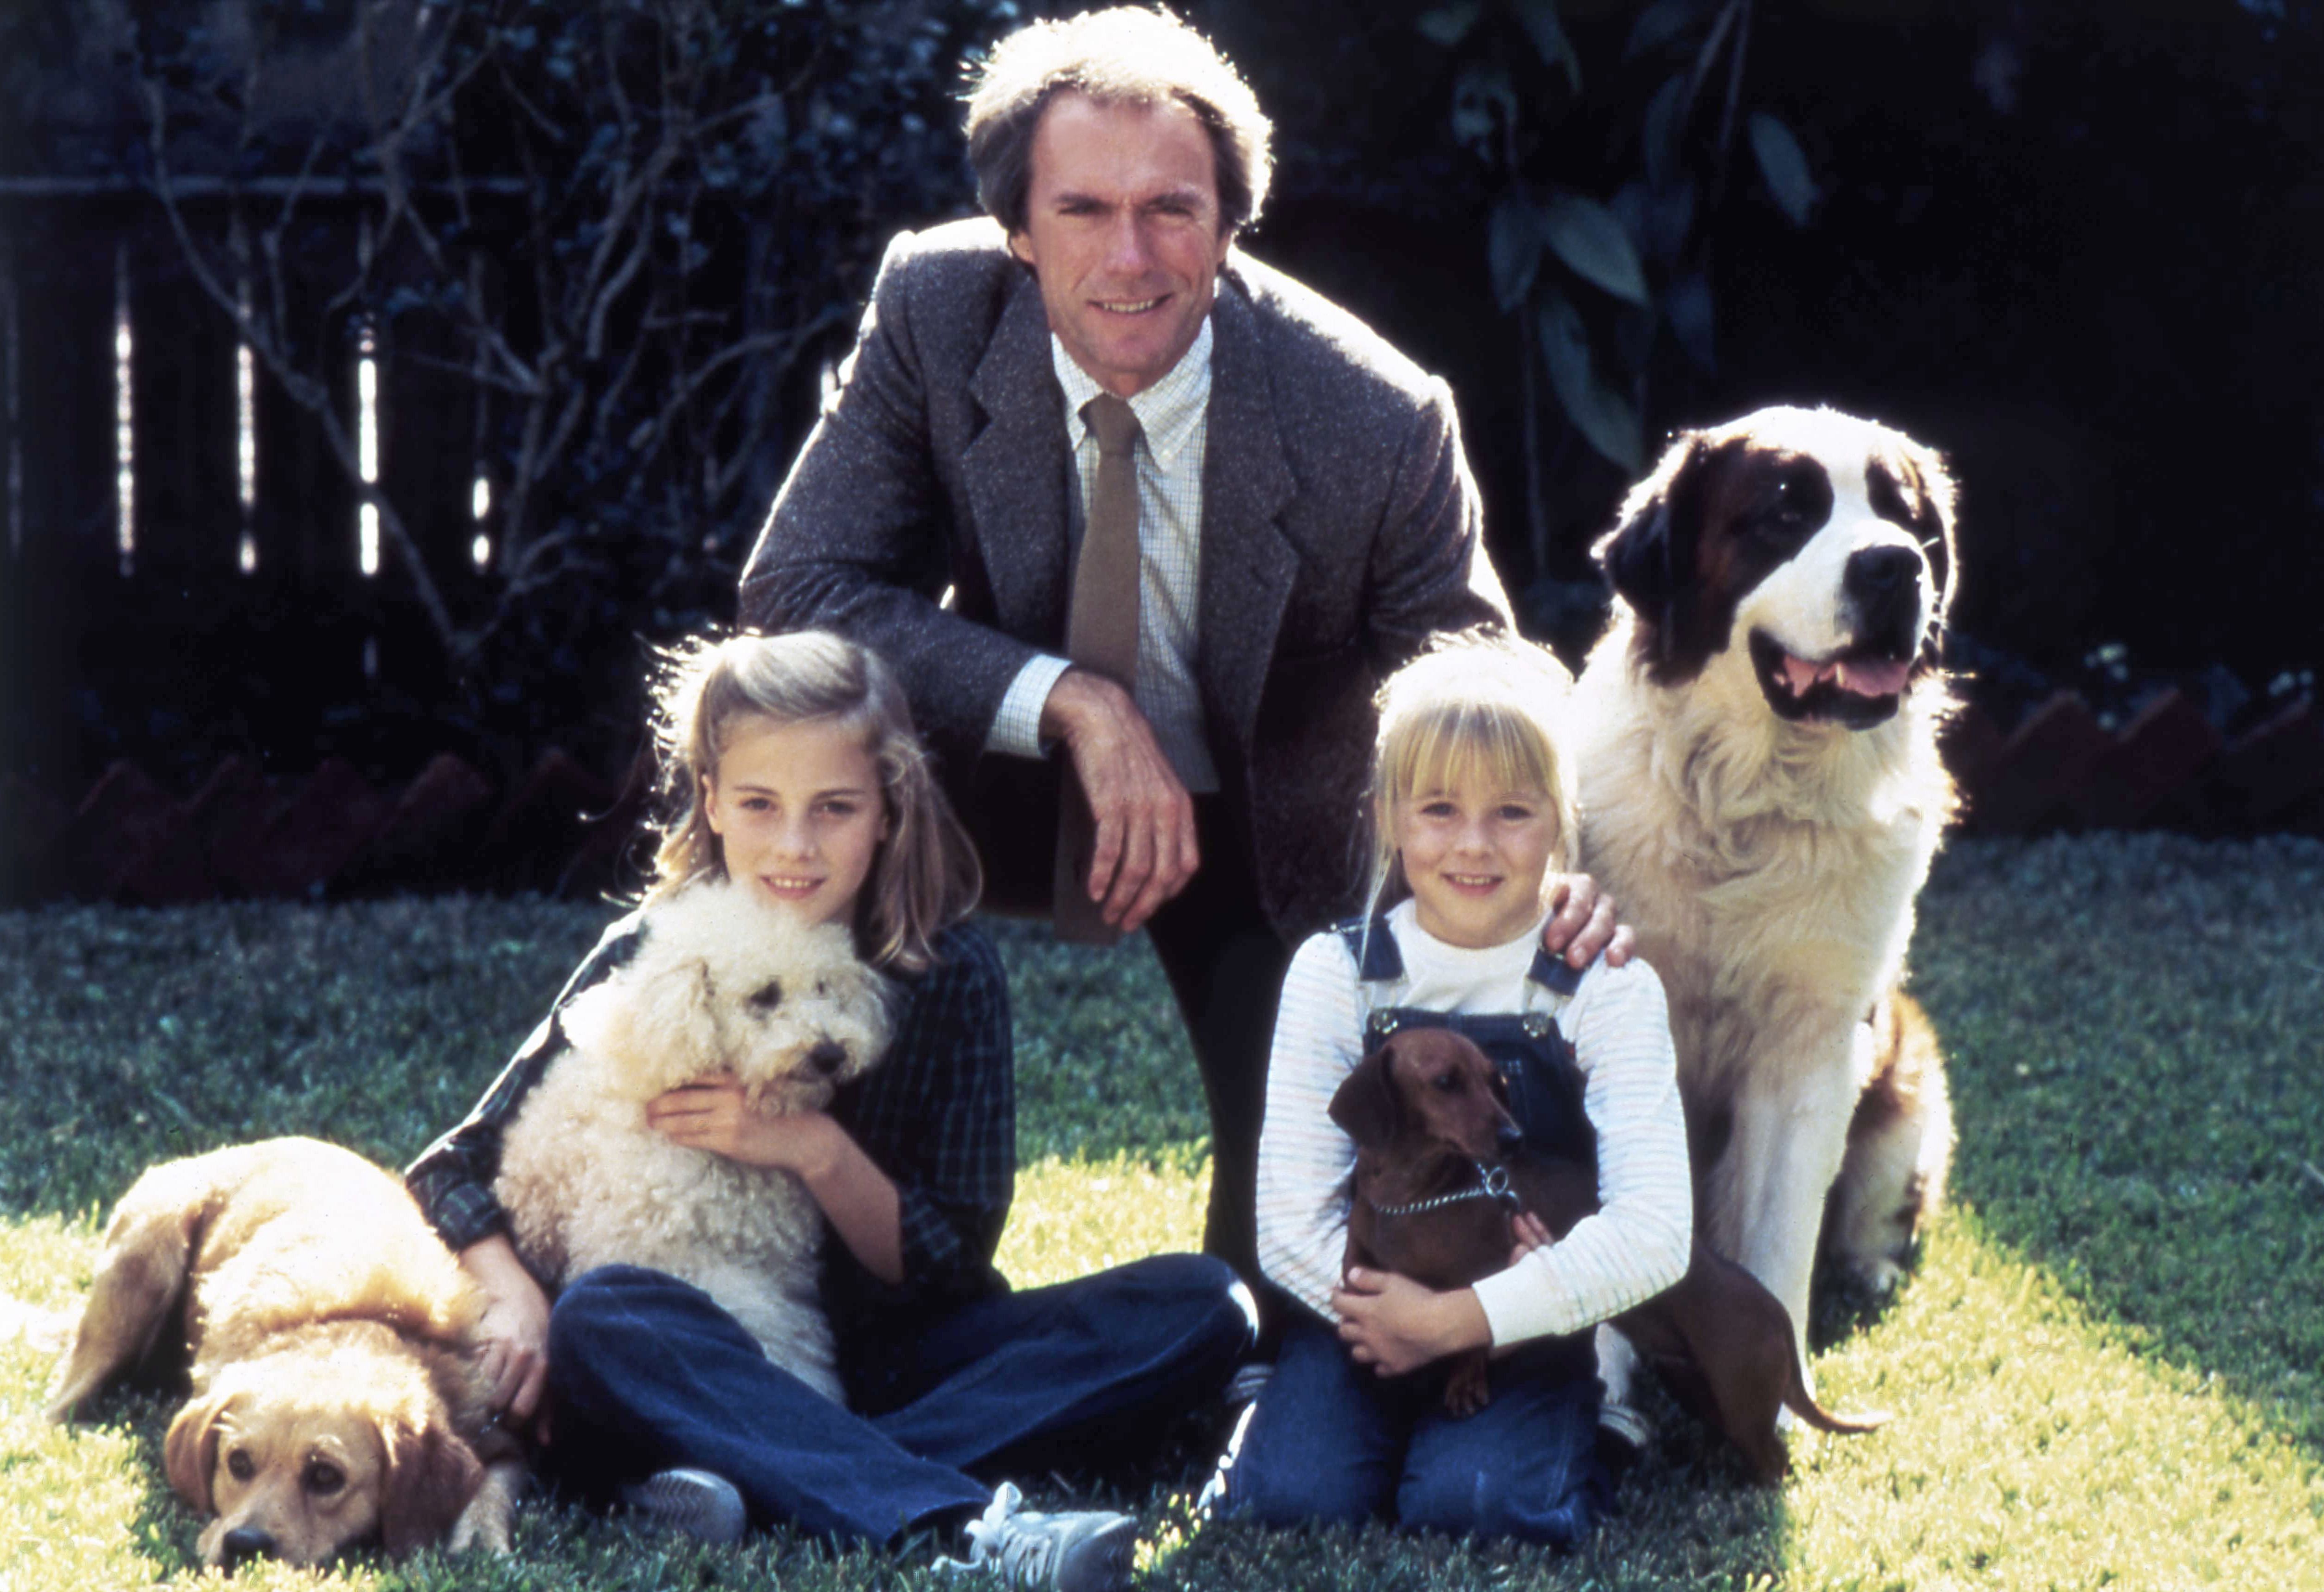 American actor Clint Eastwood with his daughter actress Alison Eastwood, and actress Jenny Beck, on the set of "Tightrope." | Source: Getty Images